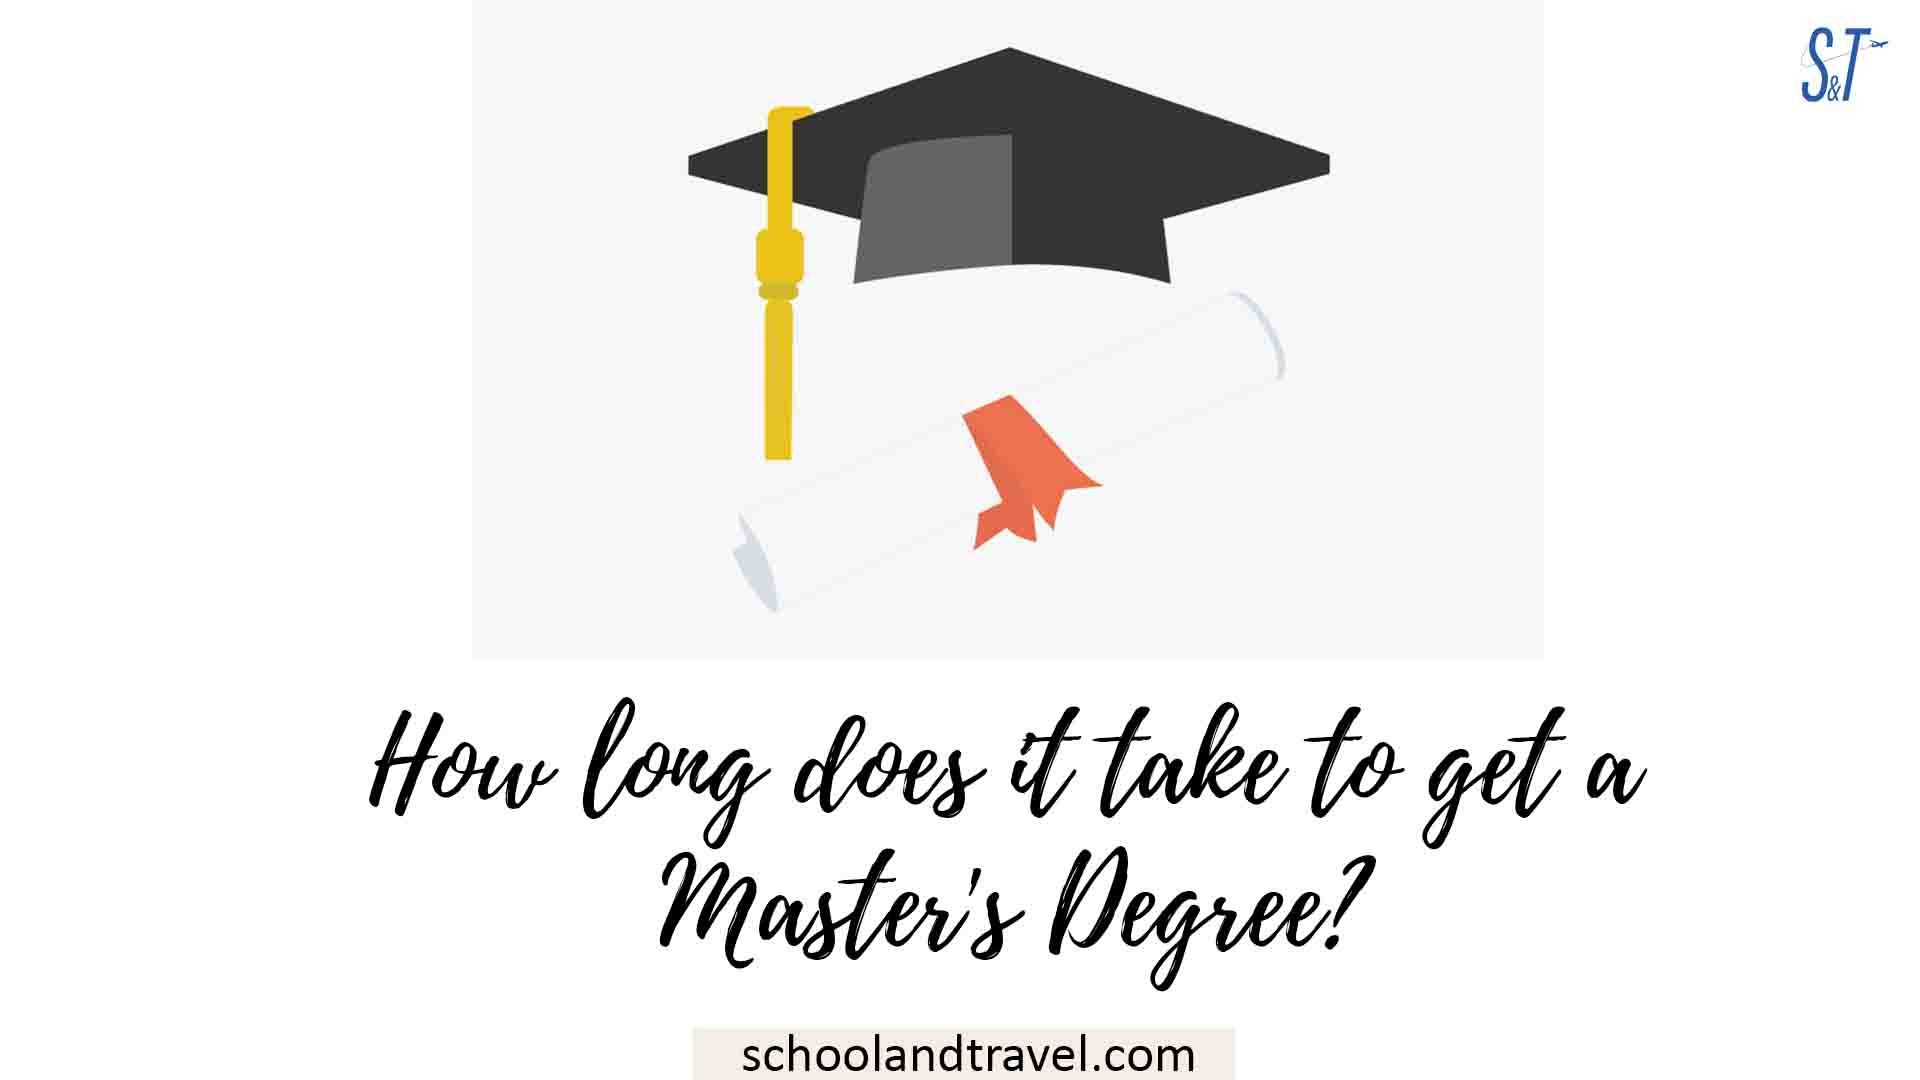 How long does it take to get a Master's Degree